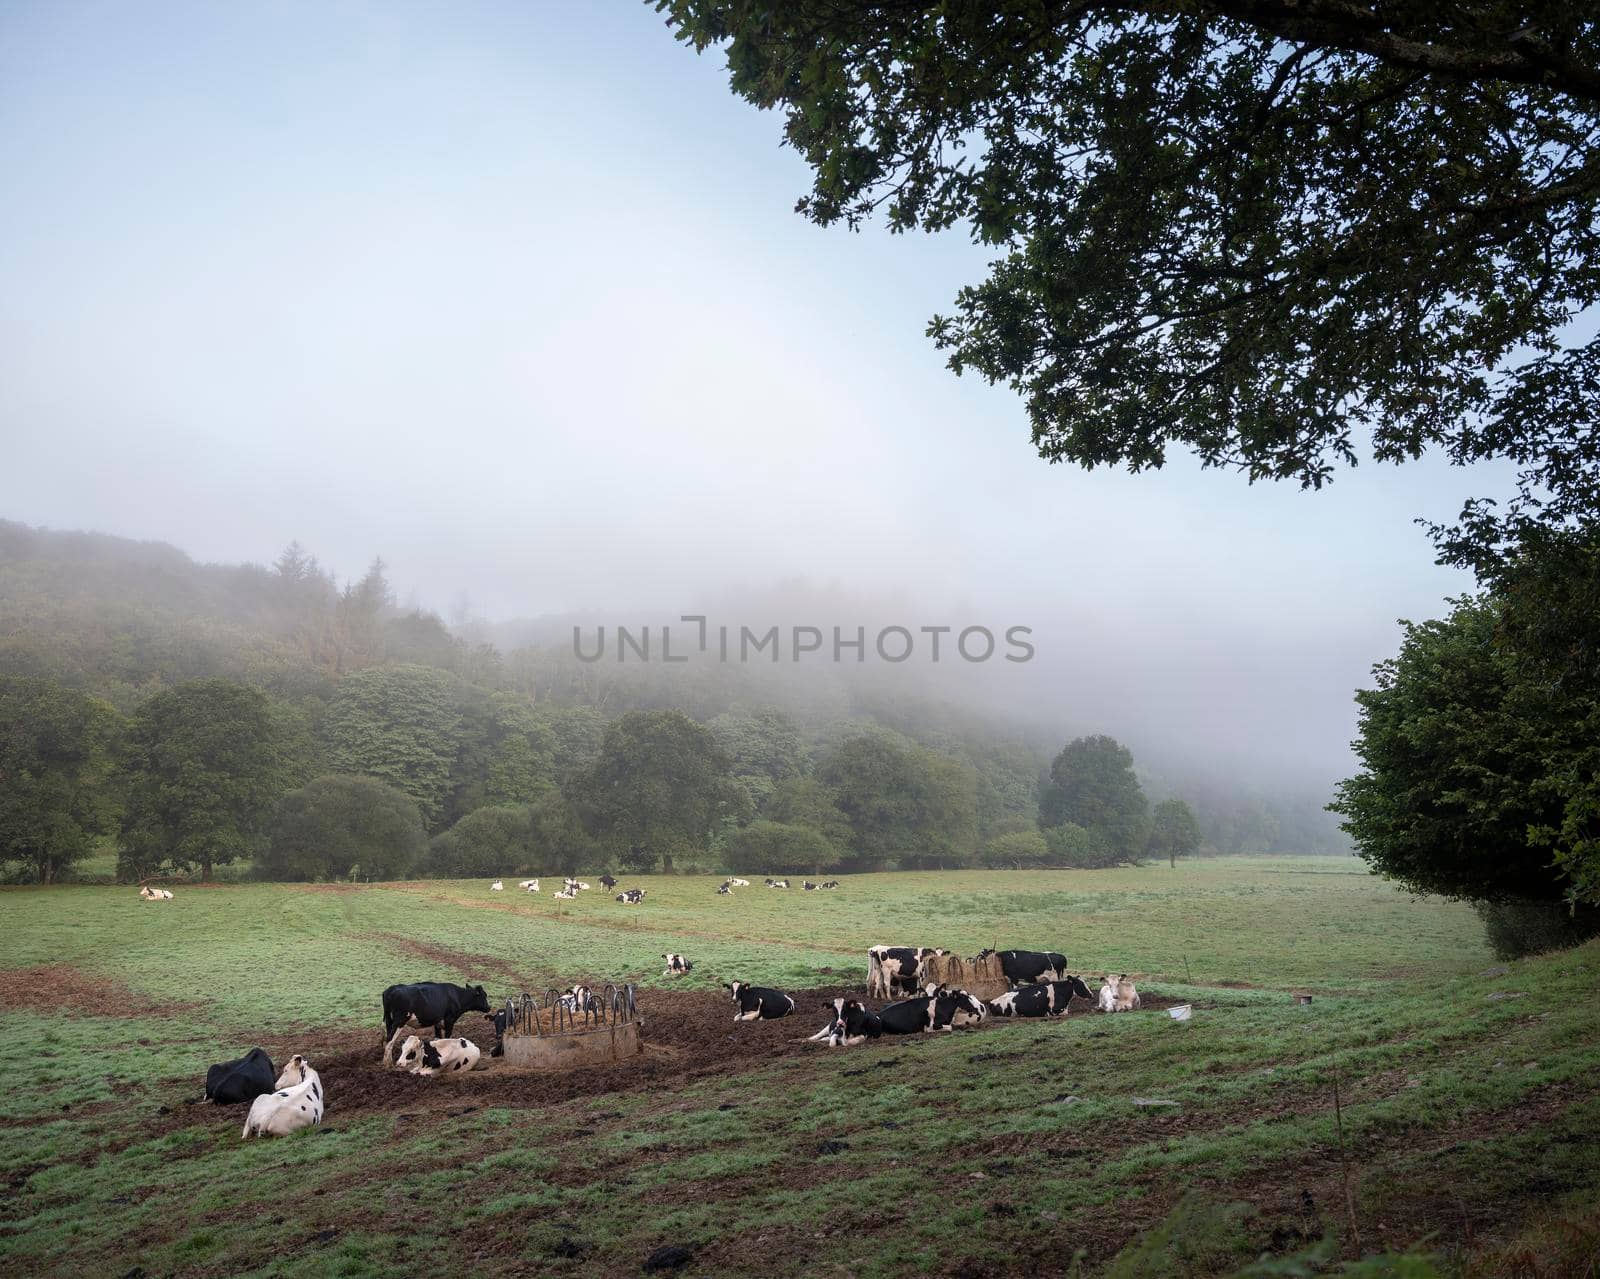 spotted cows in hills of central brittany near nature park d'armorique in france by ahavelaar